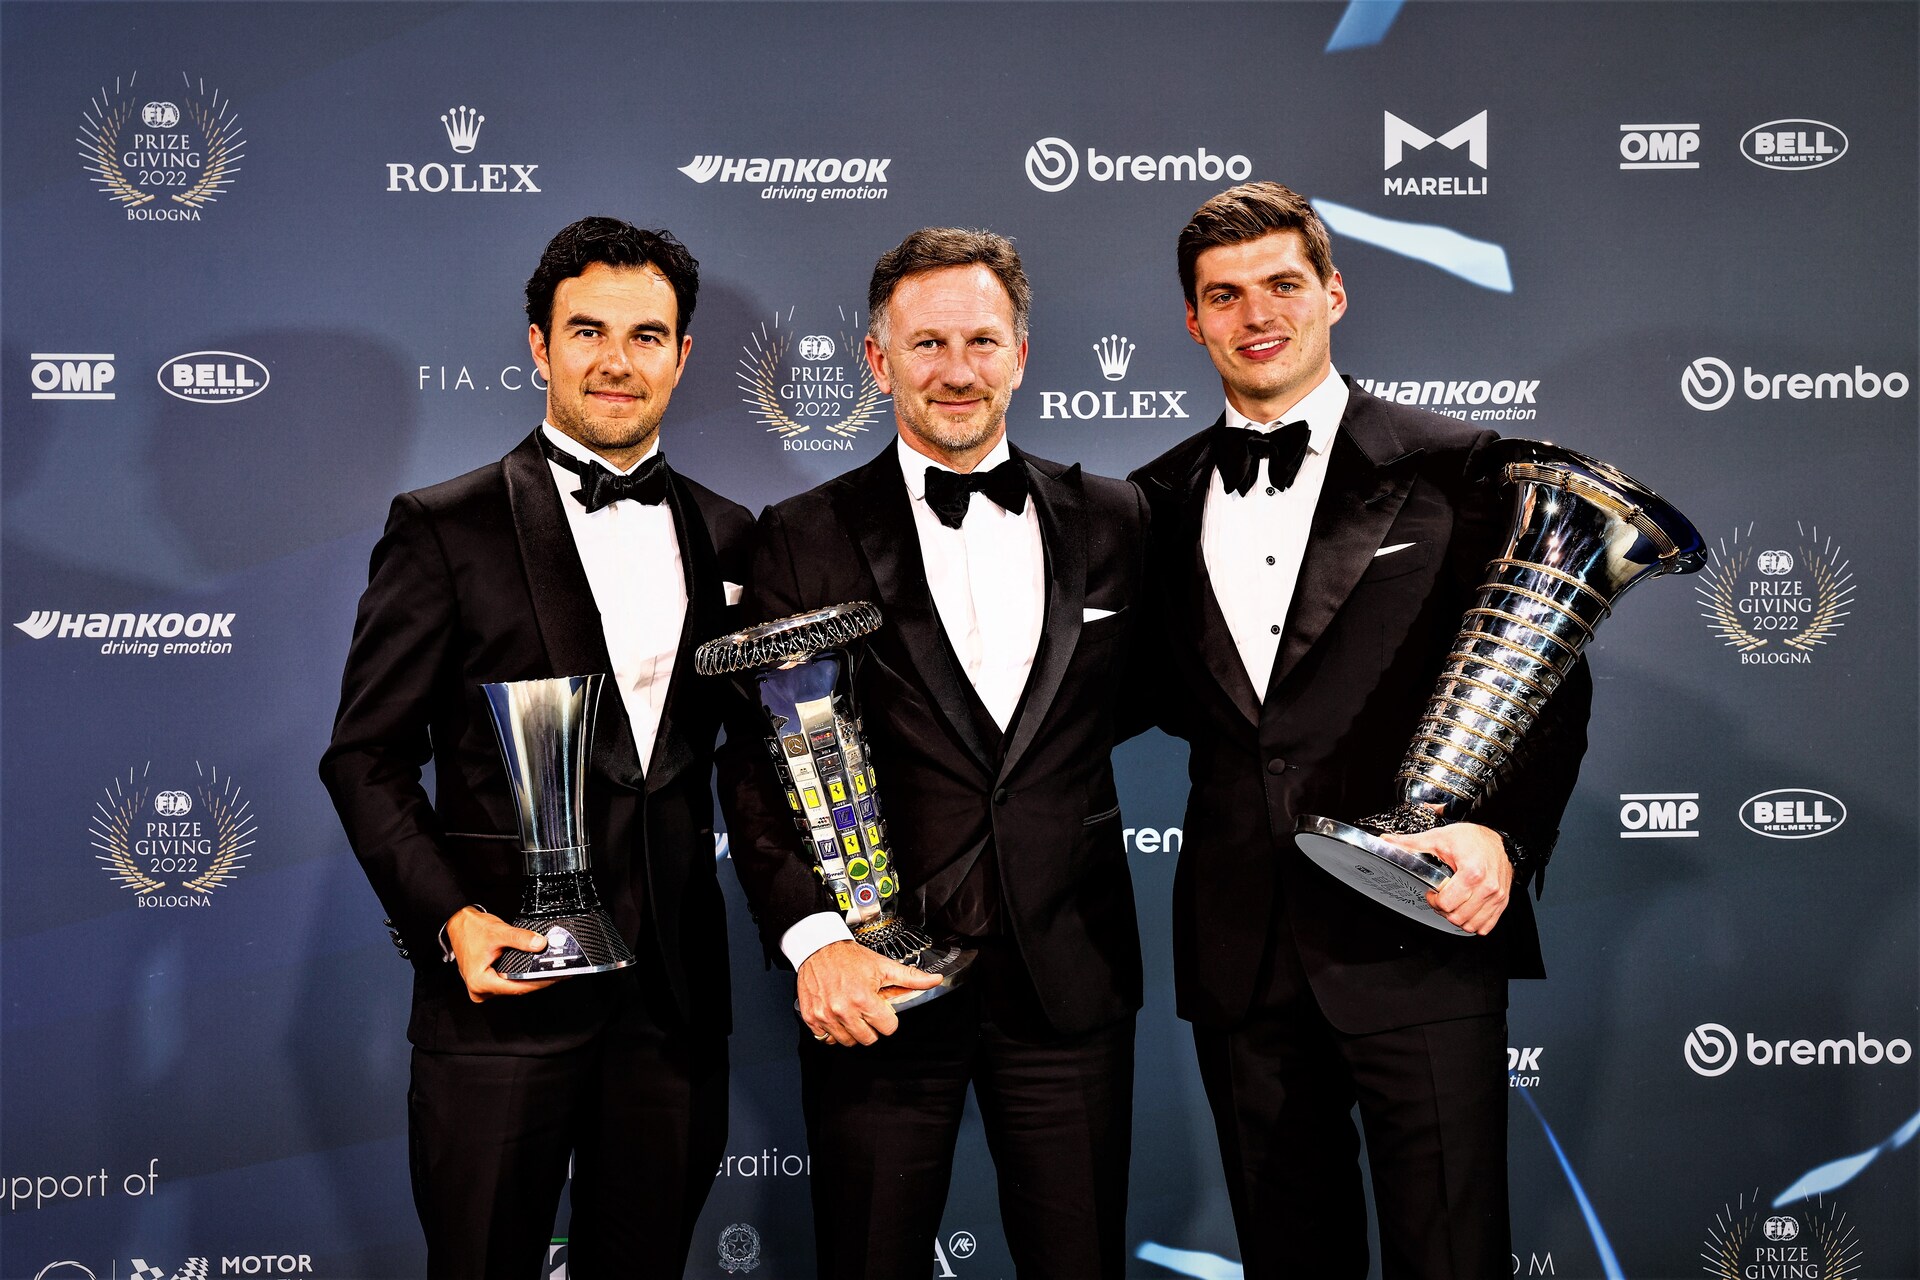 Innovation in motorsport: the 2022 FIA Awards Ceremony in Bologna Christian Horner, Red Bull Racing Team Principal in Formula 1, between drivers Sergio Pérez and Max Verstappen (Photo: FIA Media)